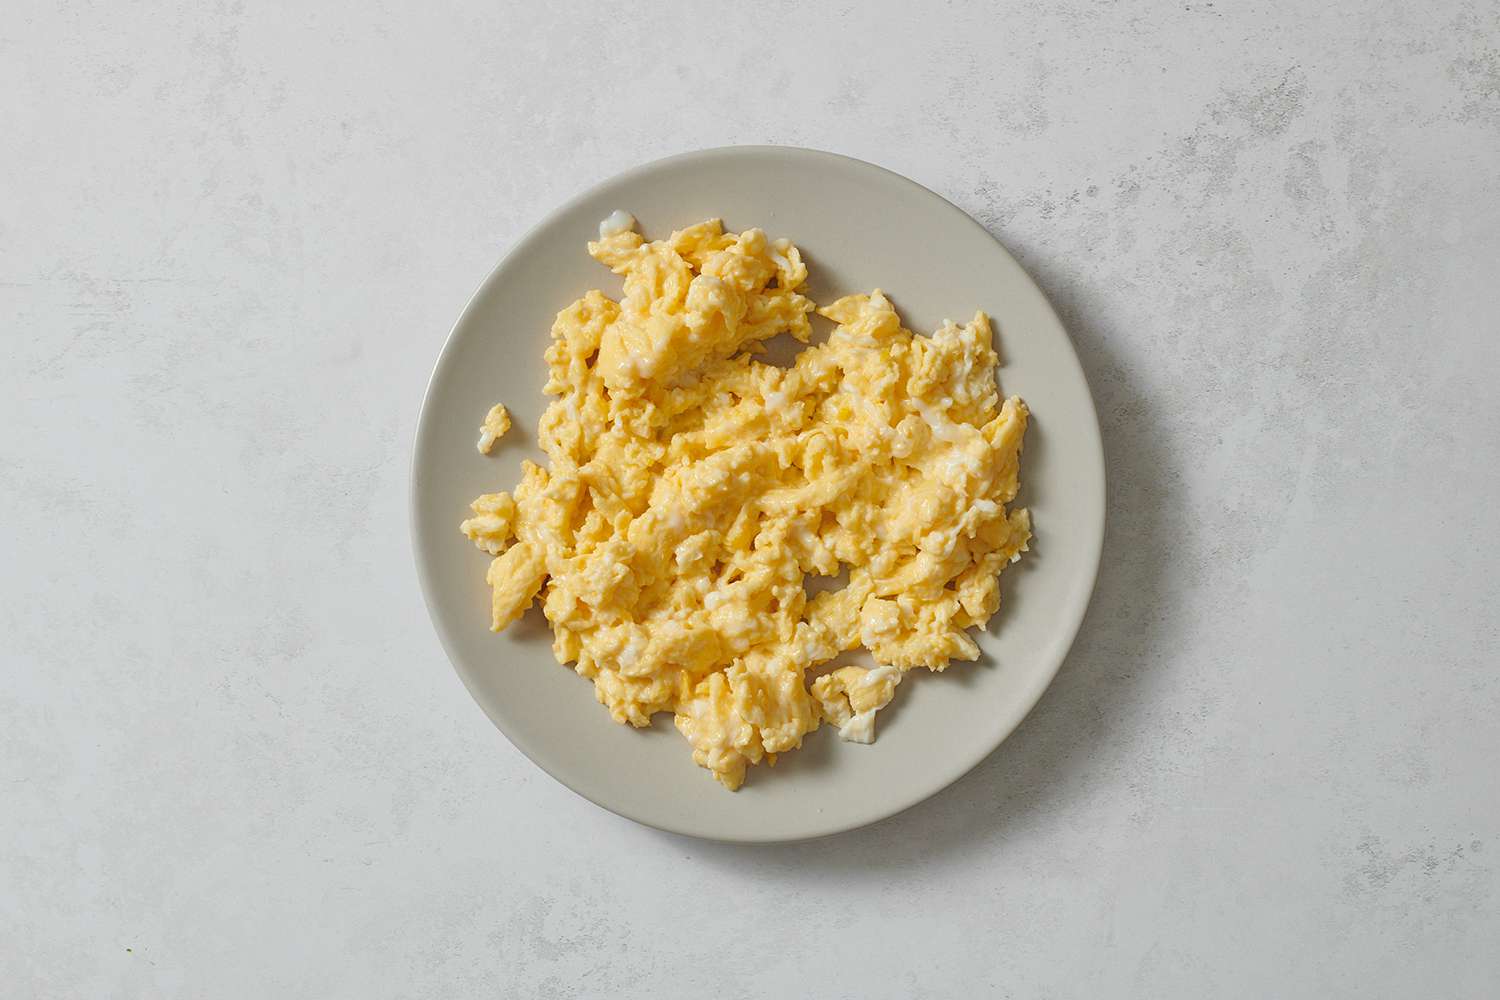 A small plate of cooked eggs